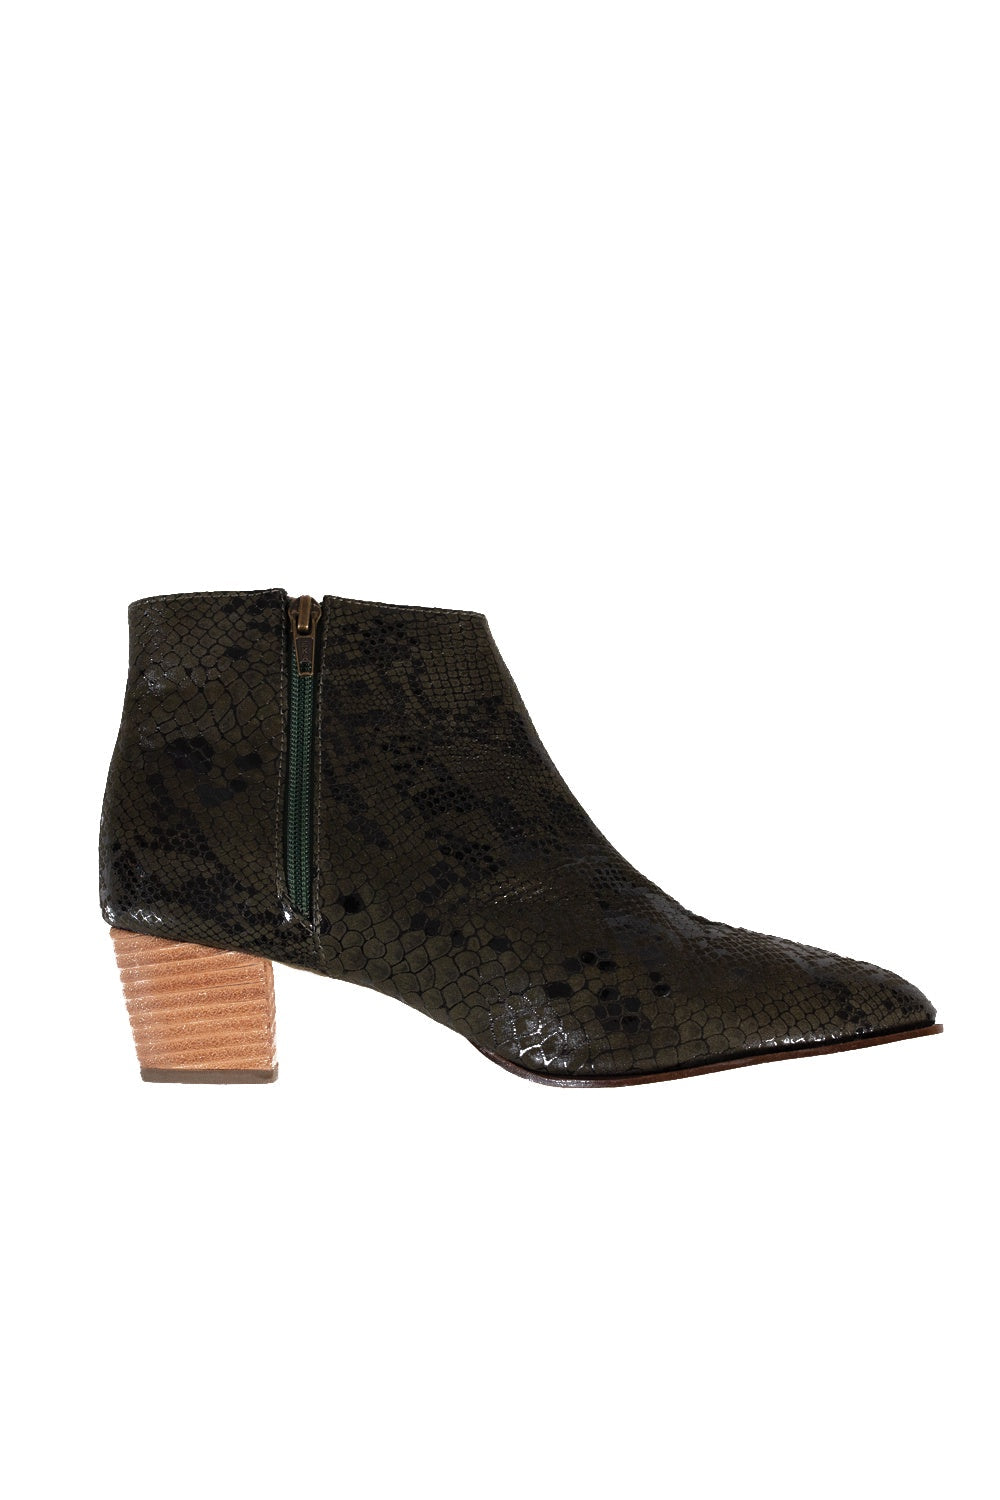 Keira Boots in Olive Snake Print Shoes